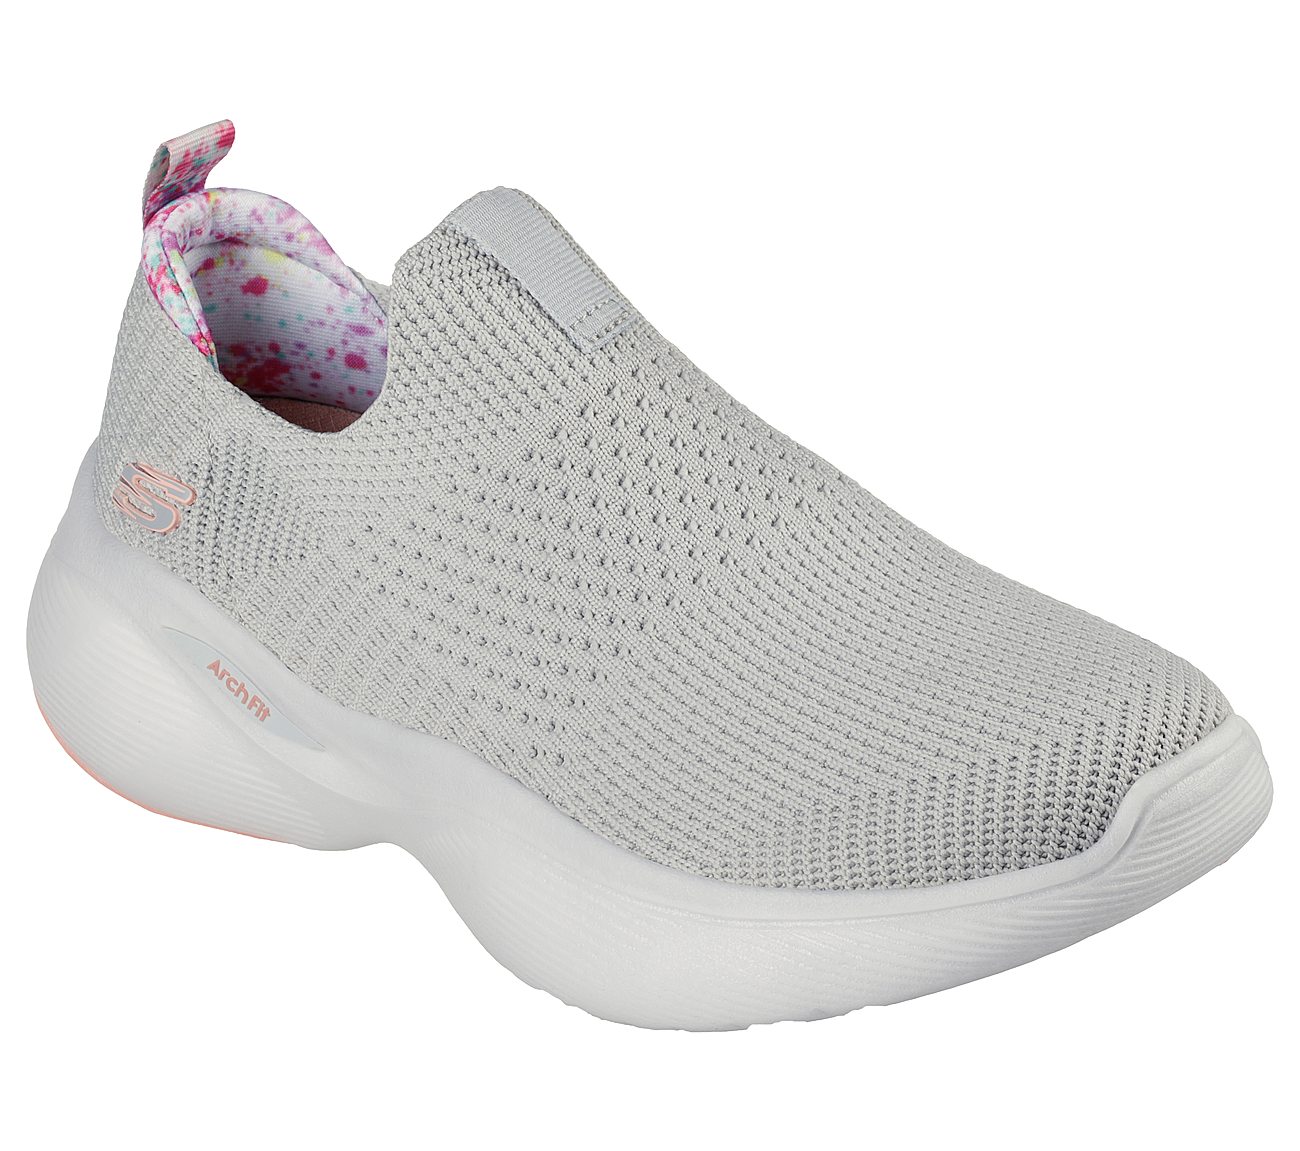 ARCH FIT INFINITY, LIGHT GREY/CORAL Footwear Right View